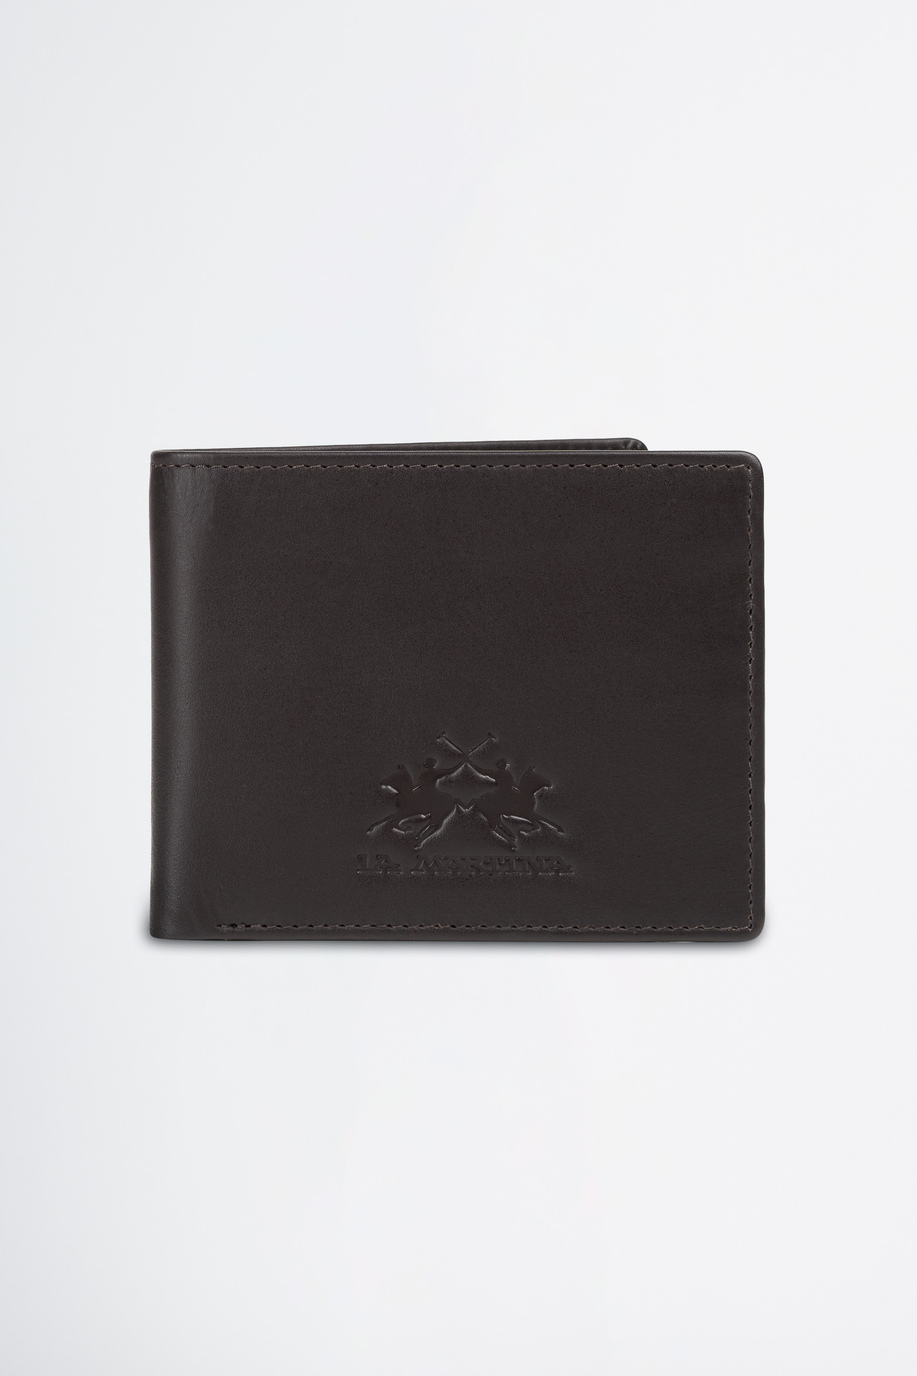 Leather wallet in solid colour - Wallets and key chains | La Martina - Official Online Shop